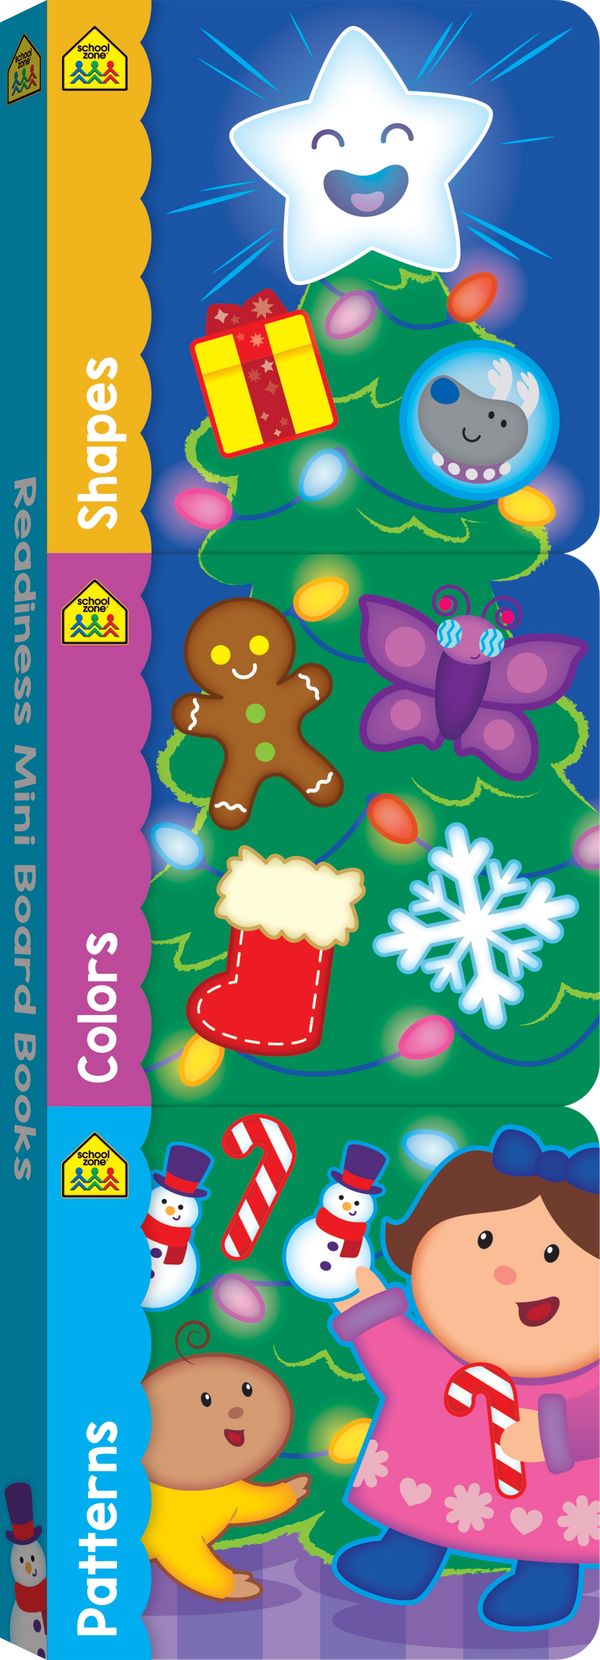 This Shapes, Colors, and Patterns trio of Readiness Mini Board Books is a terrific stocking stuffer!